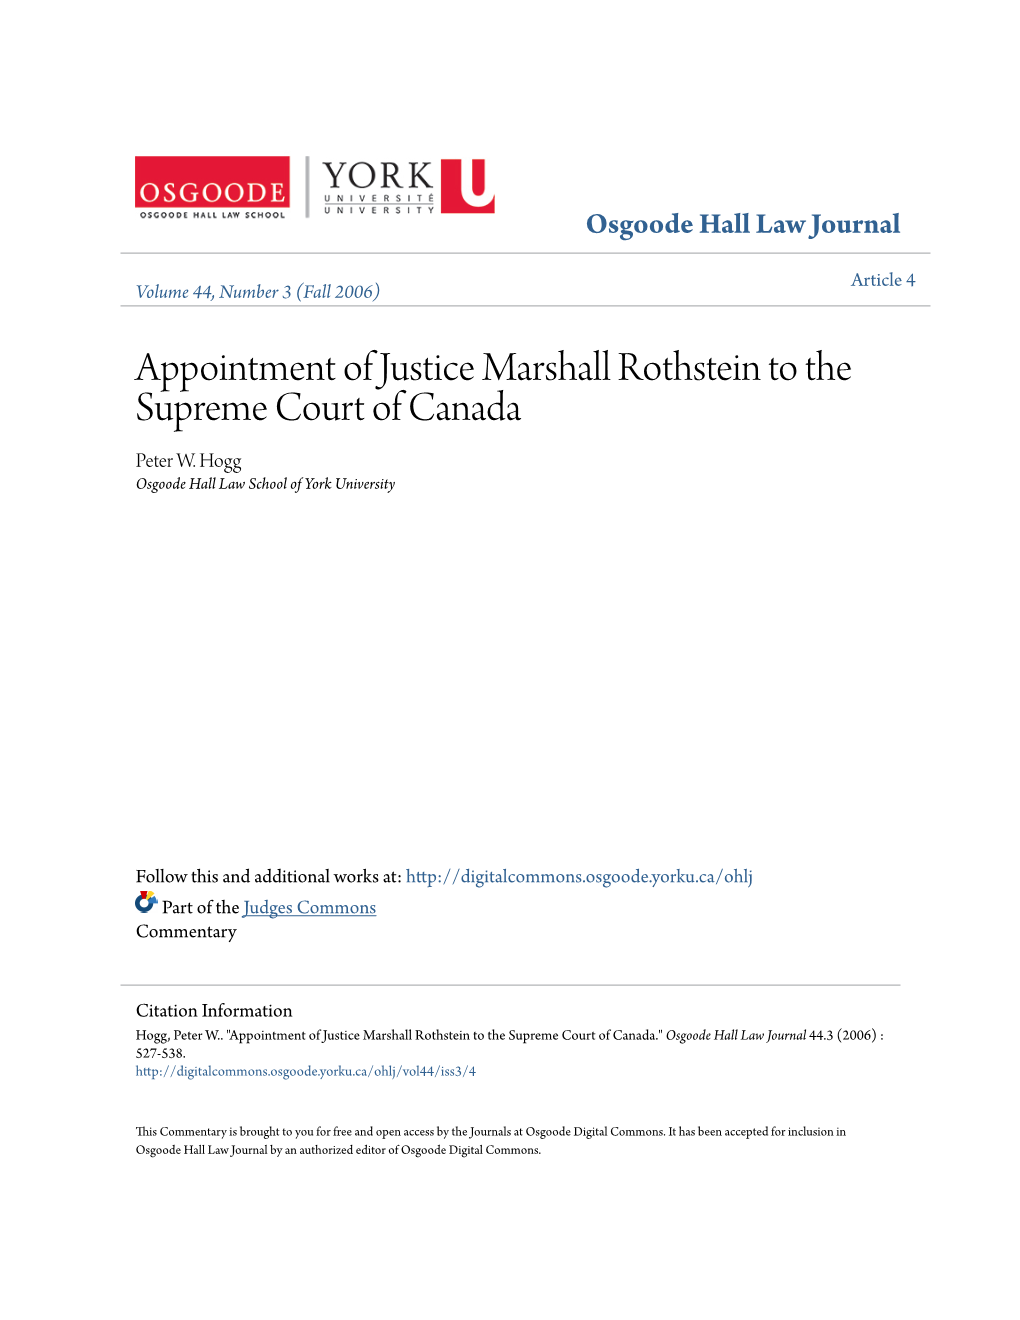 Appointment of Justice Marshall Rothstein to the Supreme Court of Canada Peter W